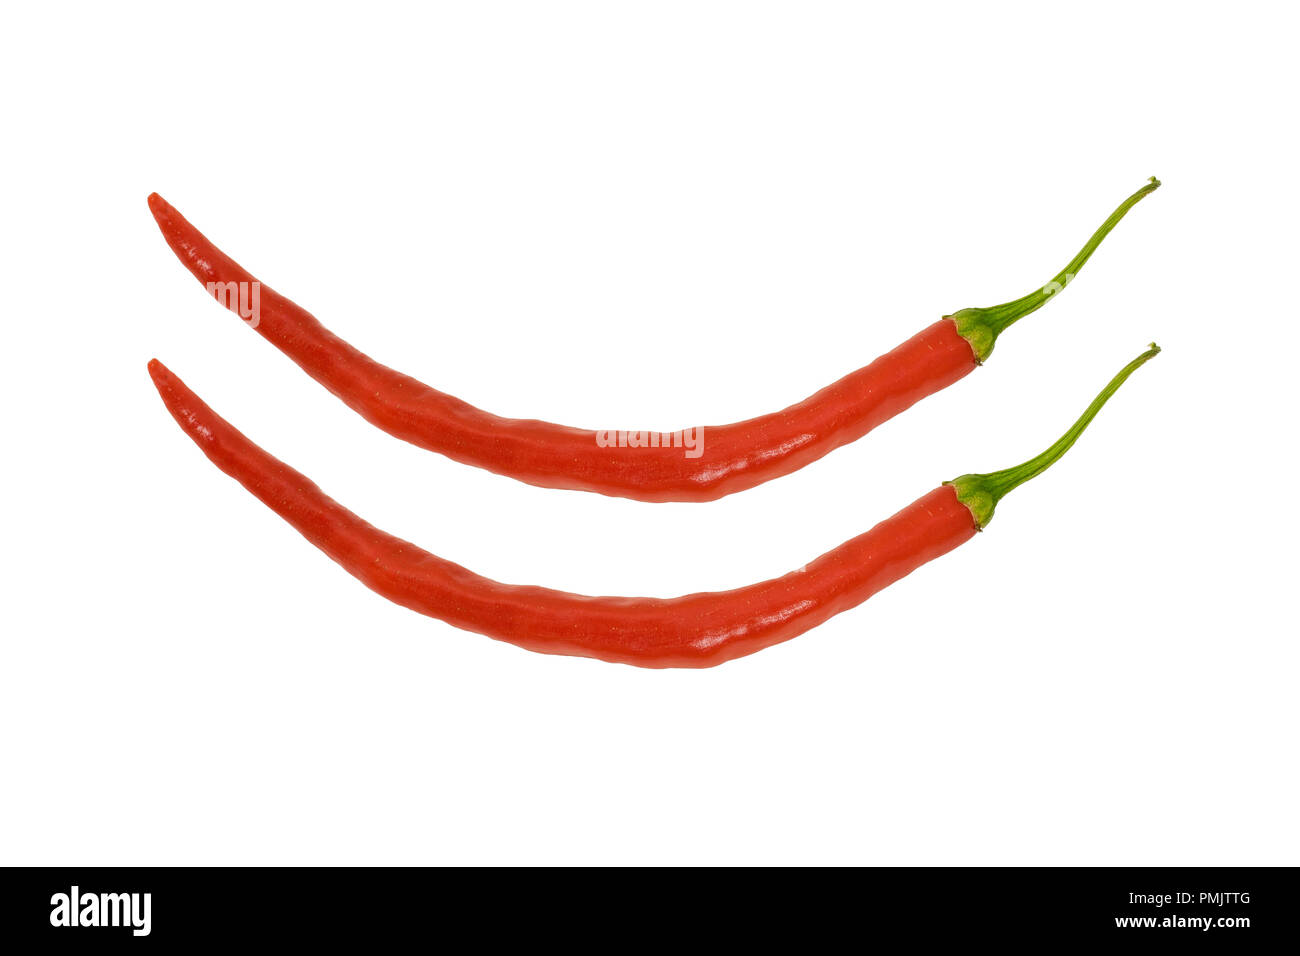 Hot Thai chili pepper 'Flame Hybrid' on a white background. Two (2) chilis. Stock Photo